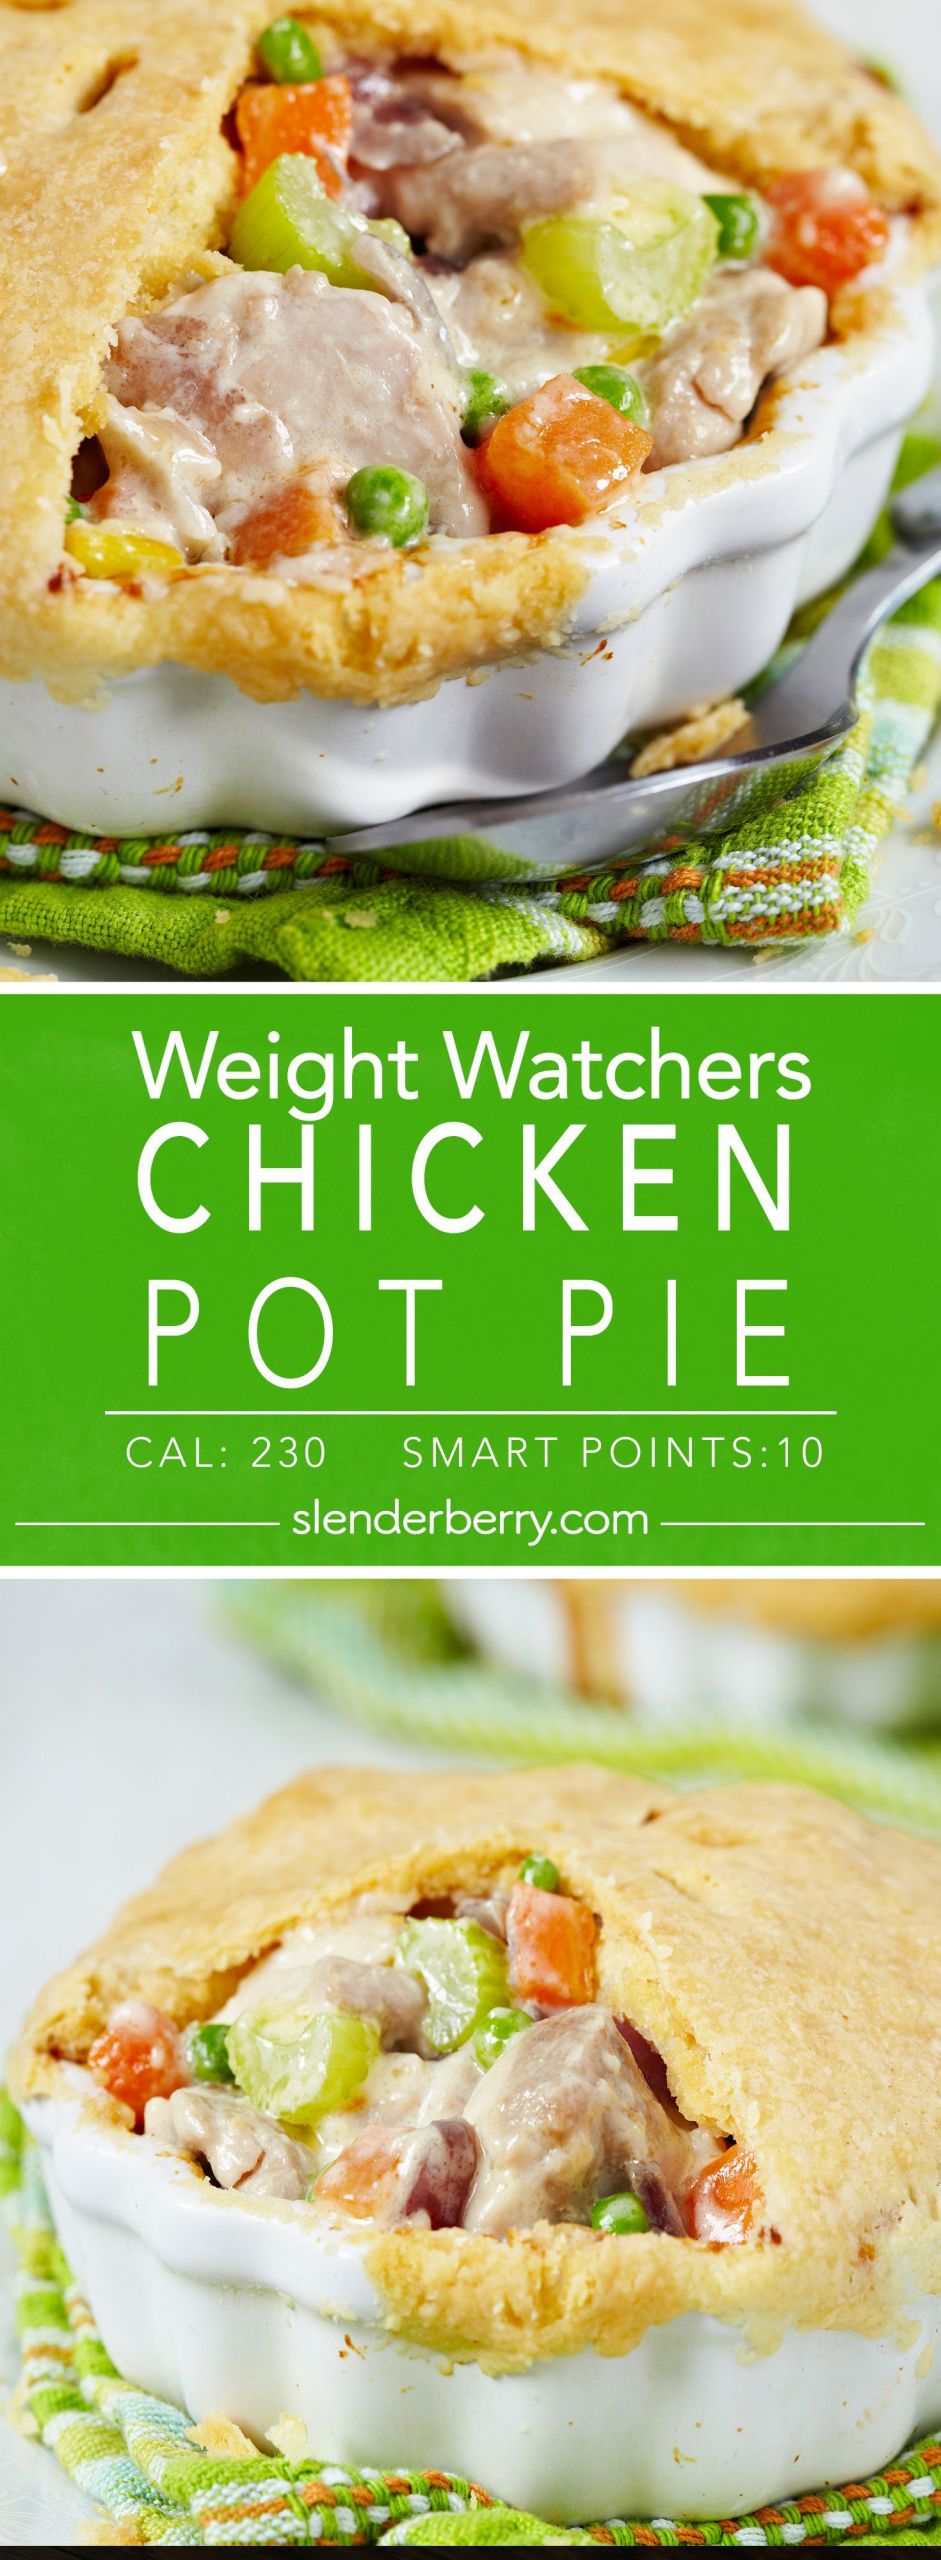 15 Recipes for Great Low Calorie Chicken Pot Pie